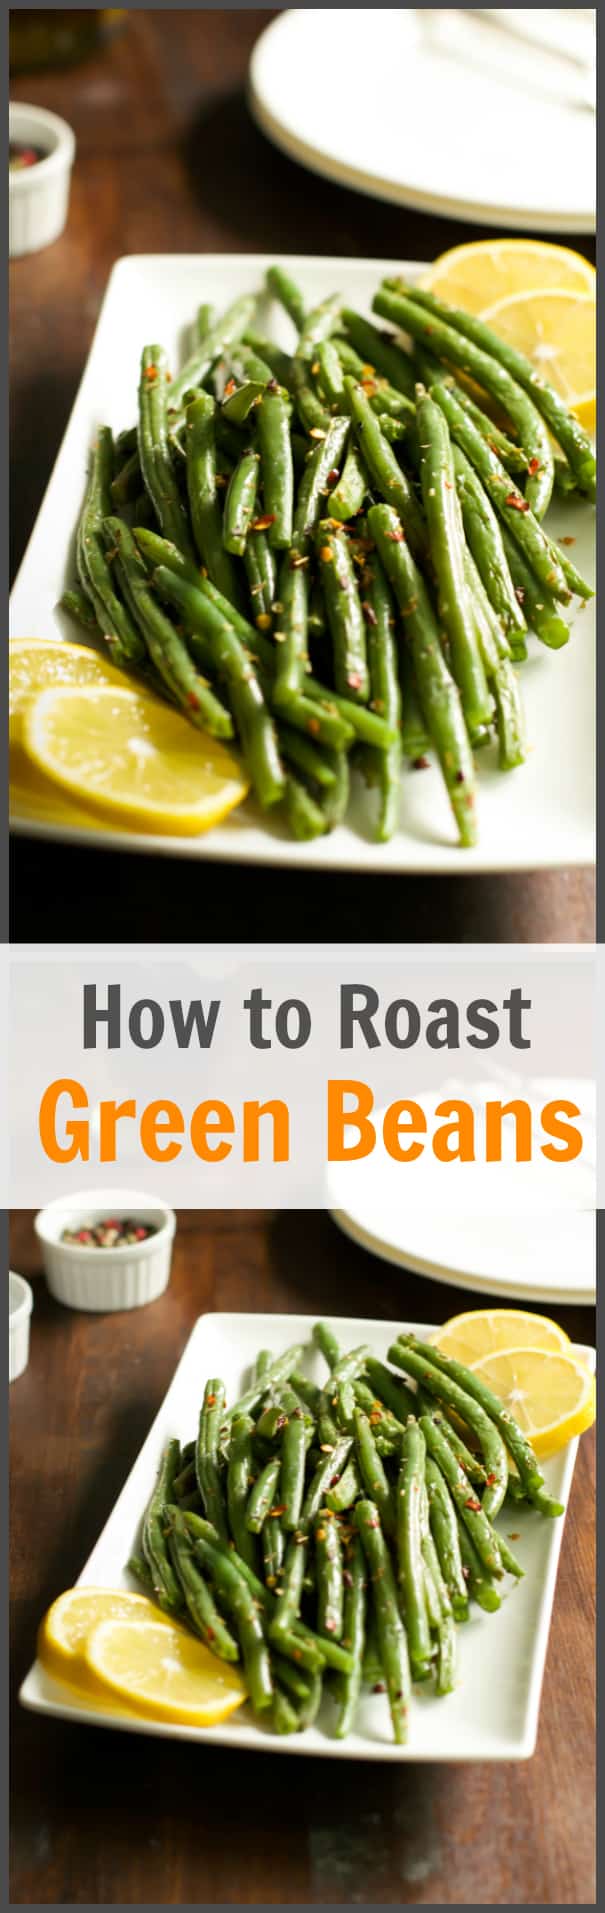 how to roast green beans